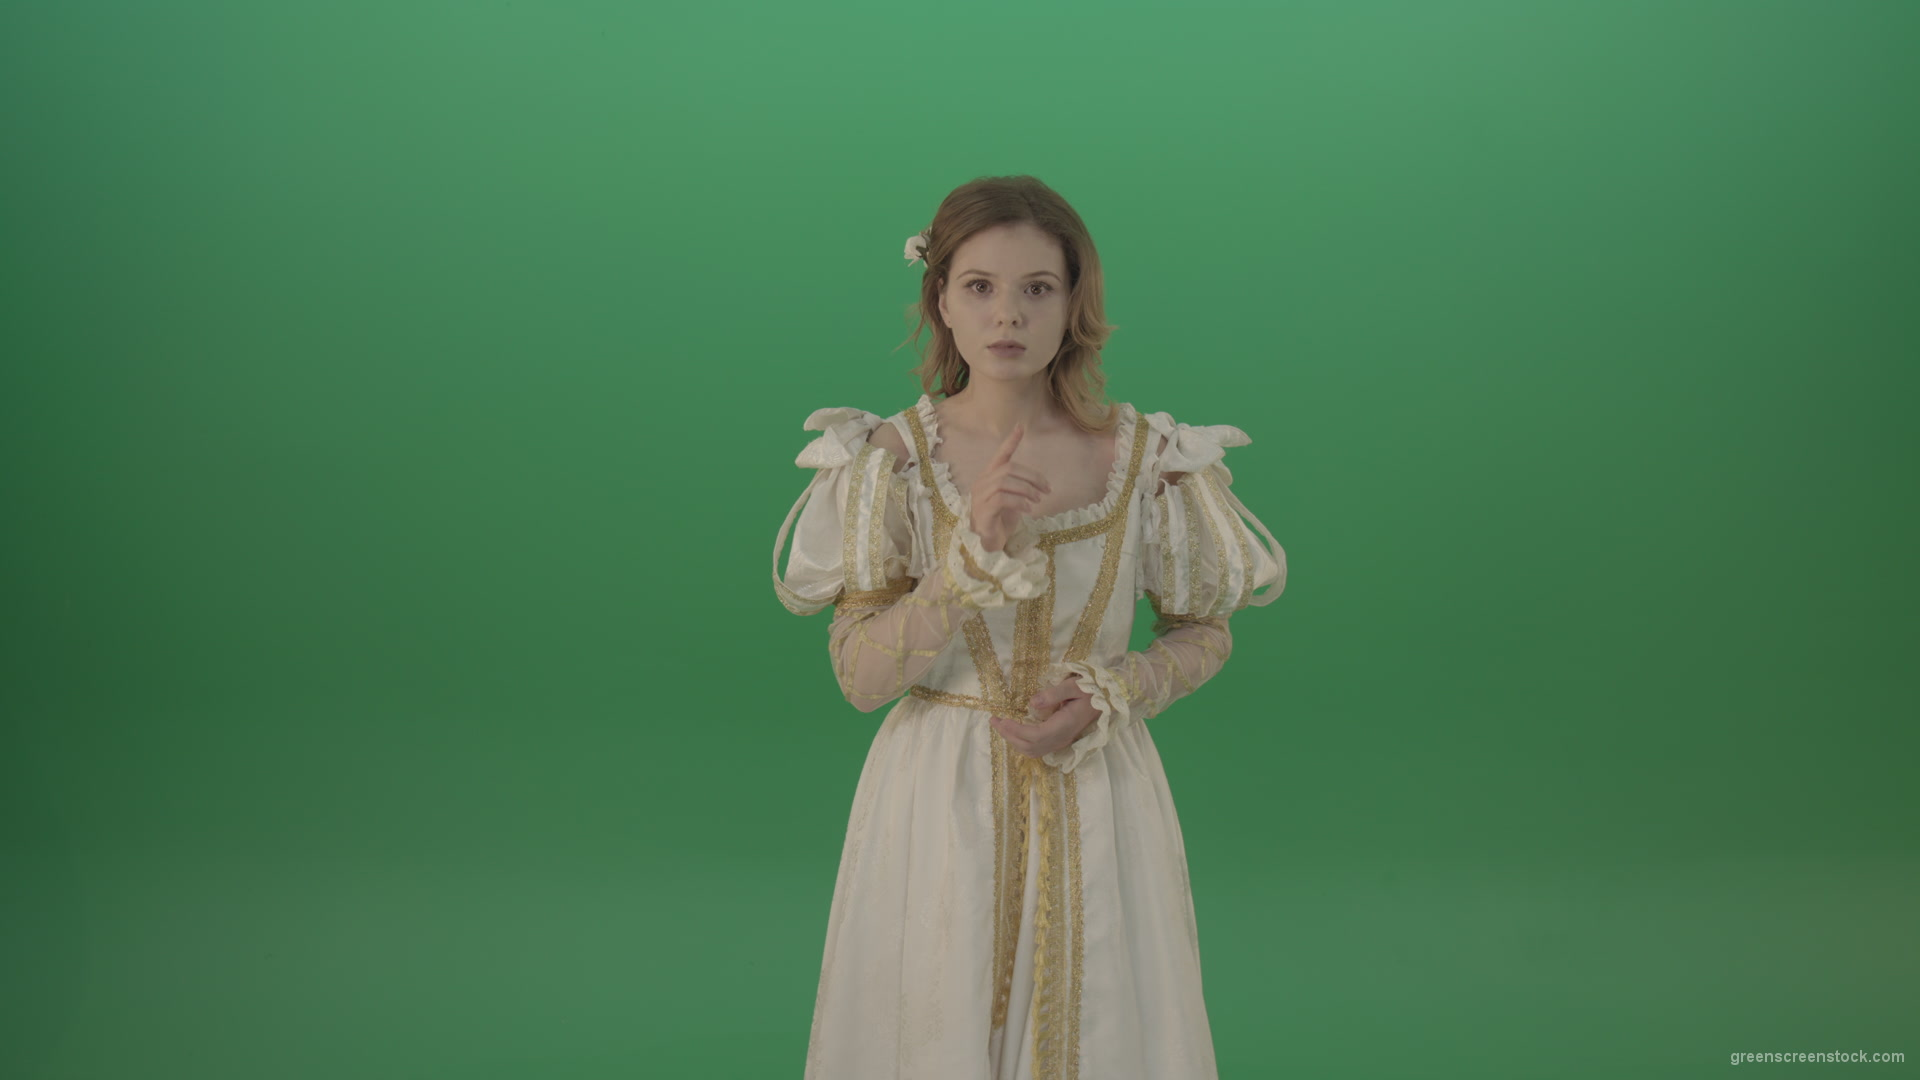 Girl-asks-to-be-quieter-in-a-white-dress-isolated-on-green-screen_005 Green Screen Stock